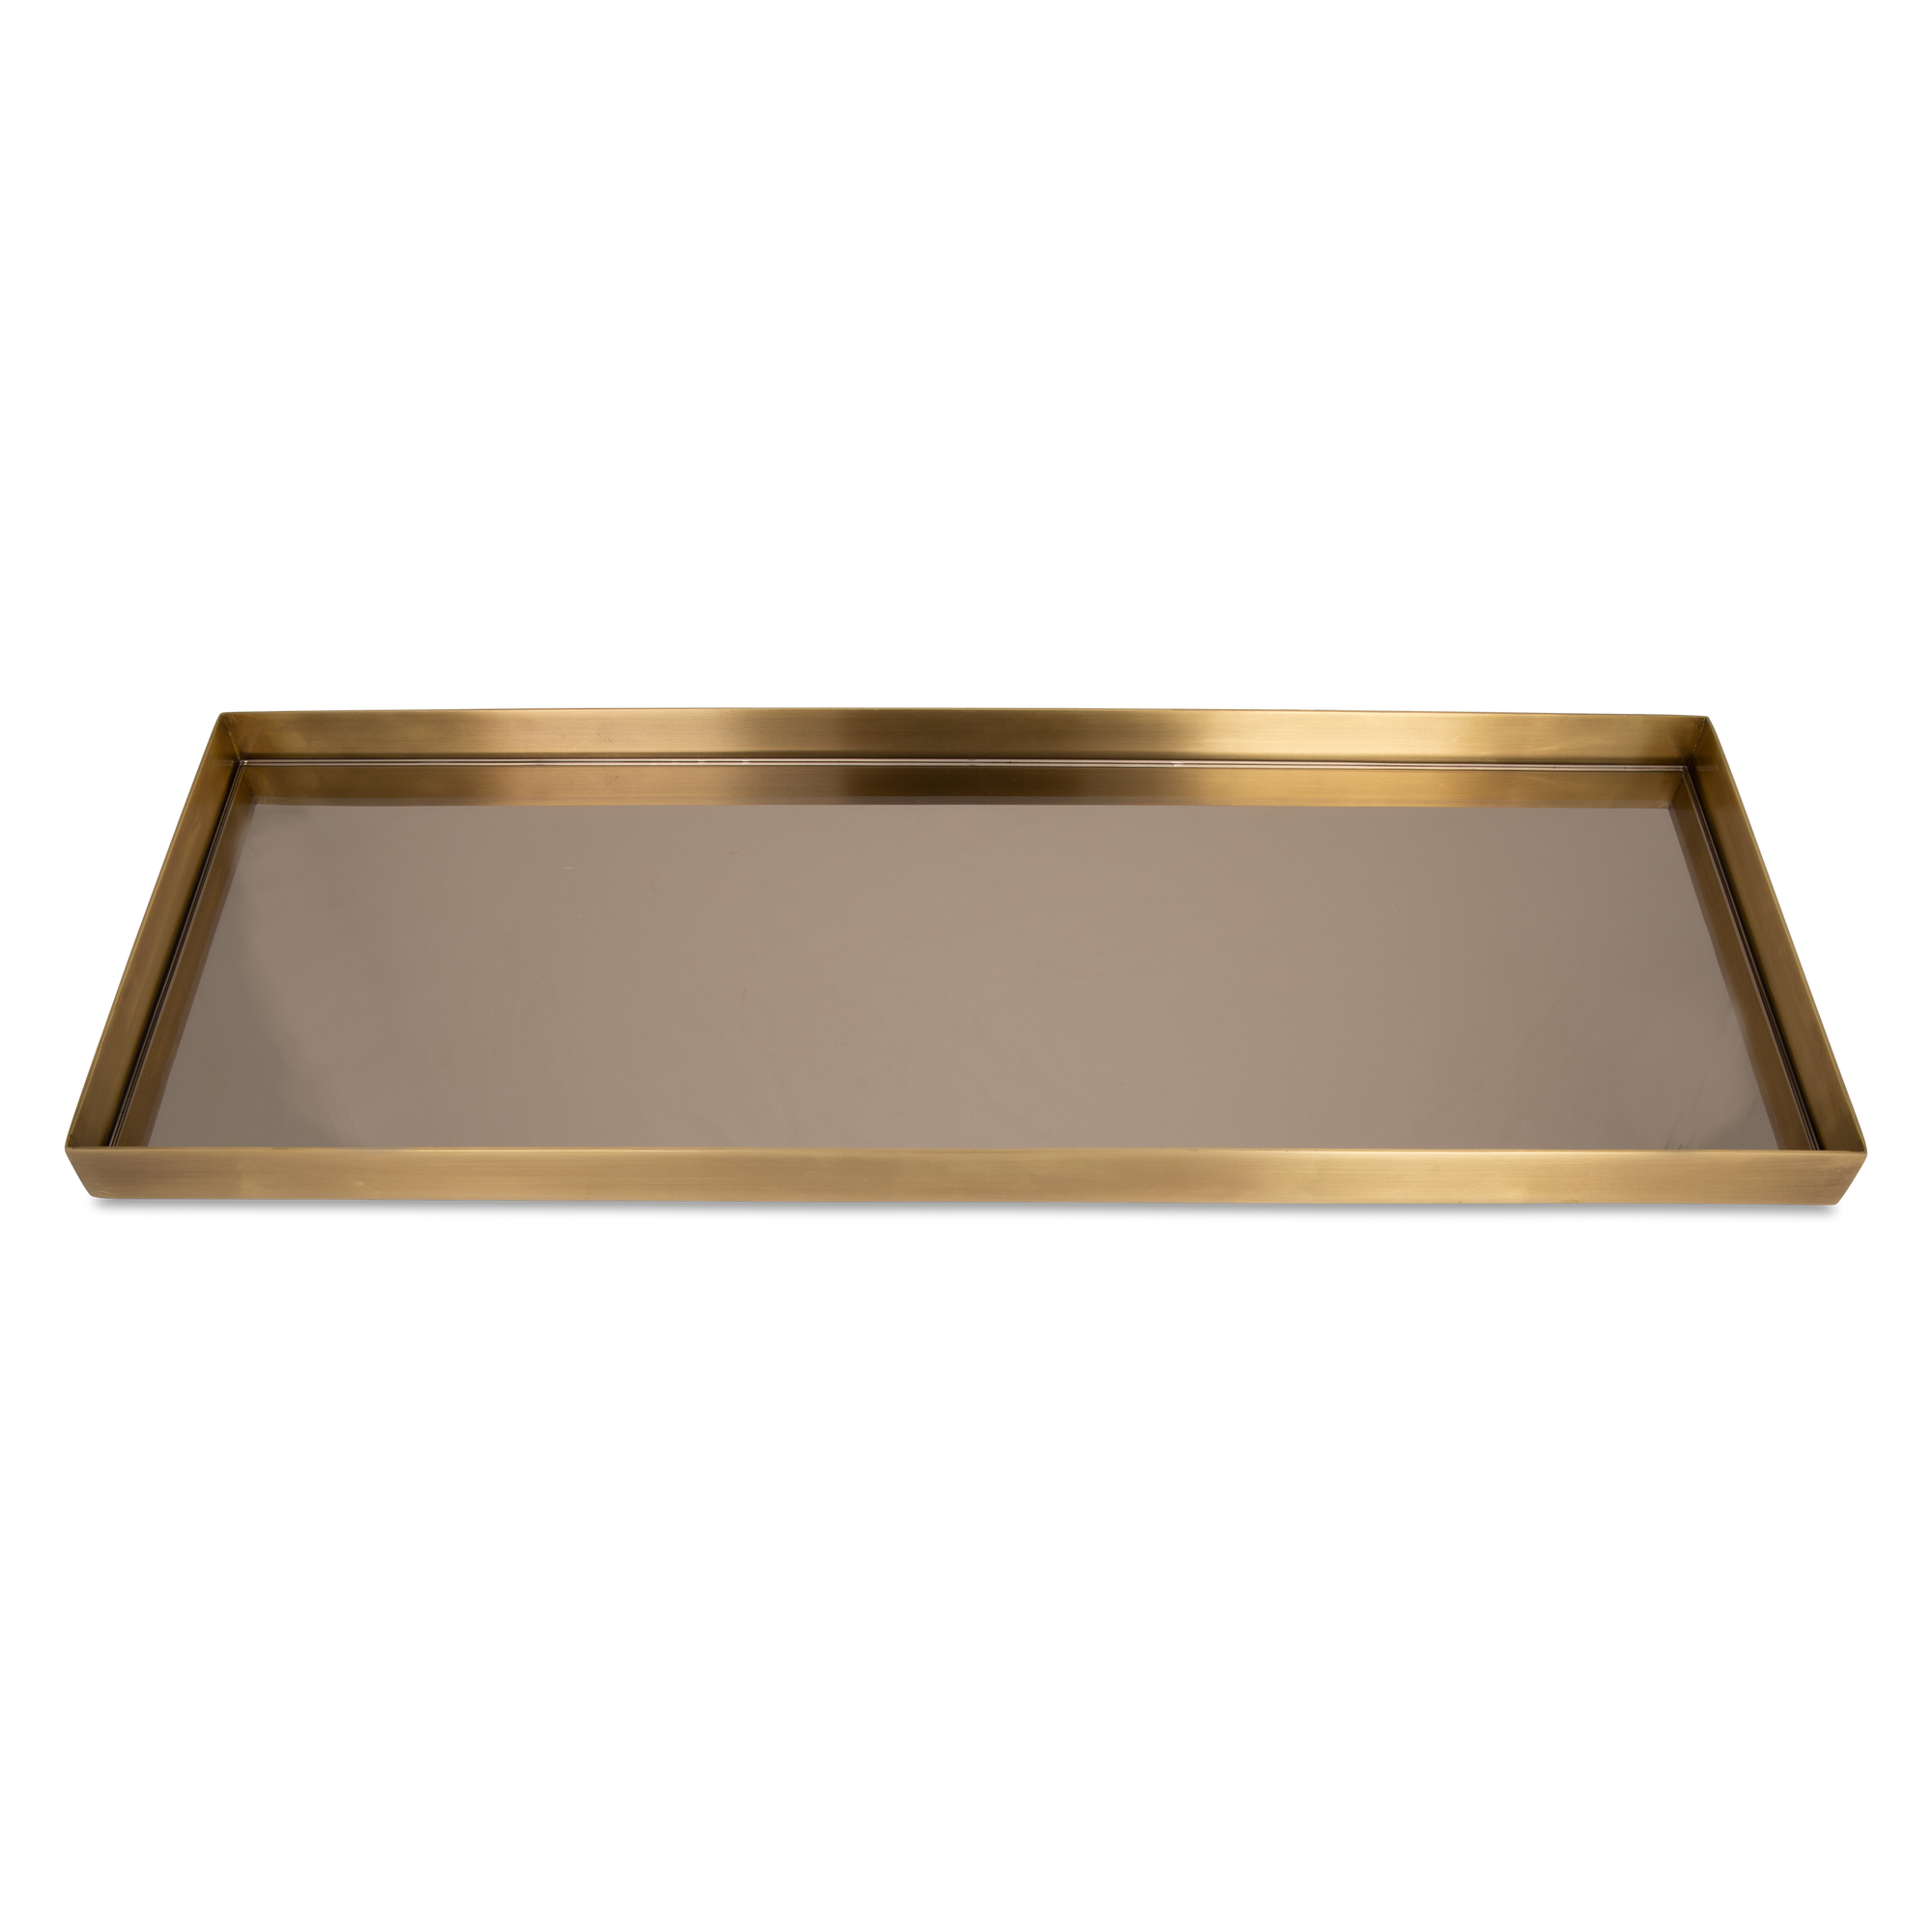 Elevating your tabletop collection, the Vision Tray is made with sleek brass with a smoked inset mirror is both stylish and functional.